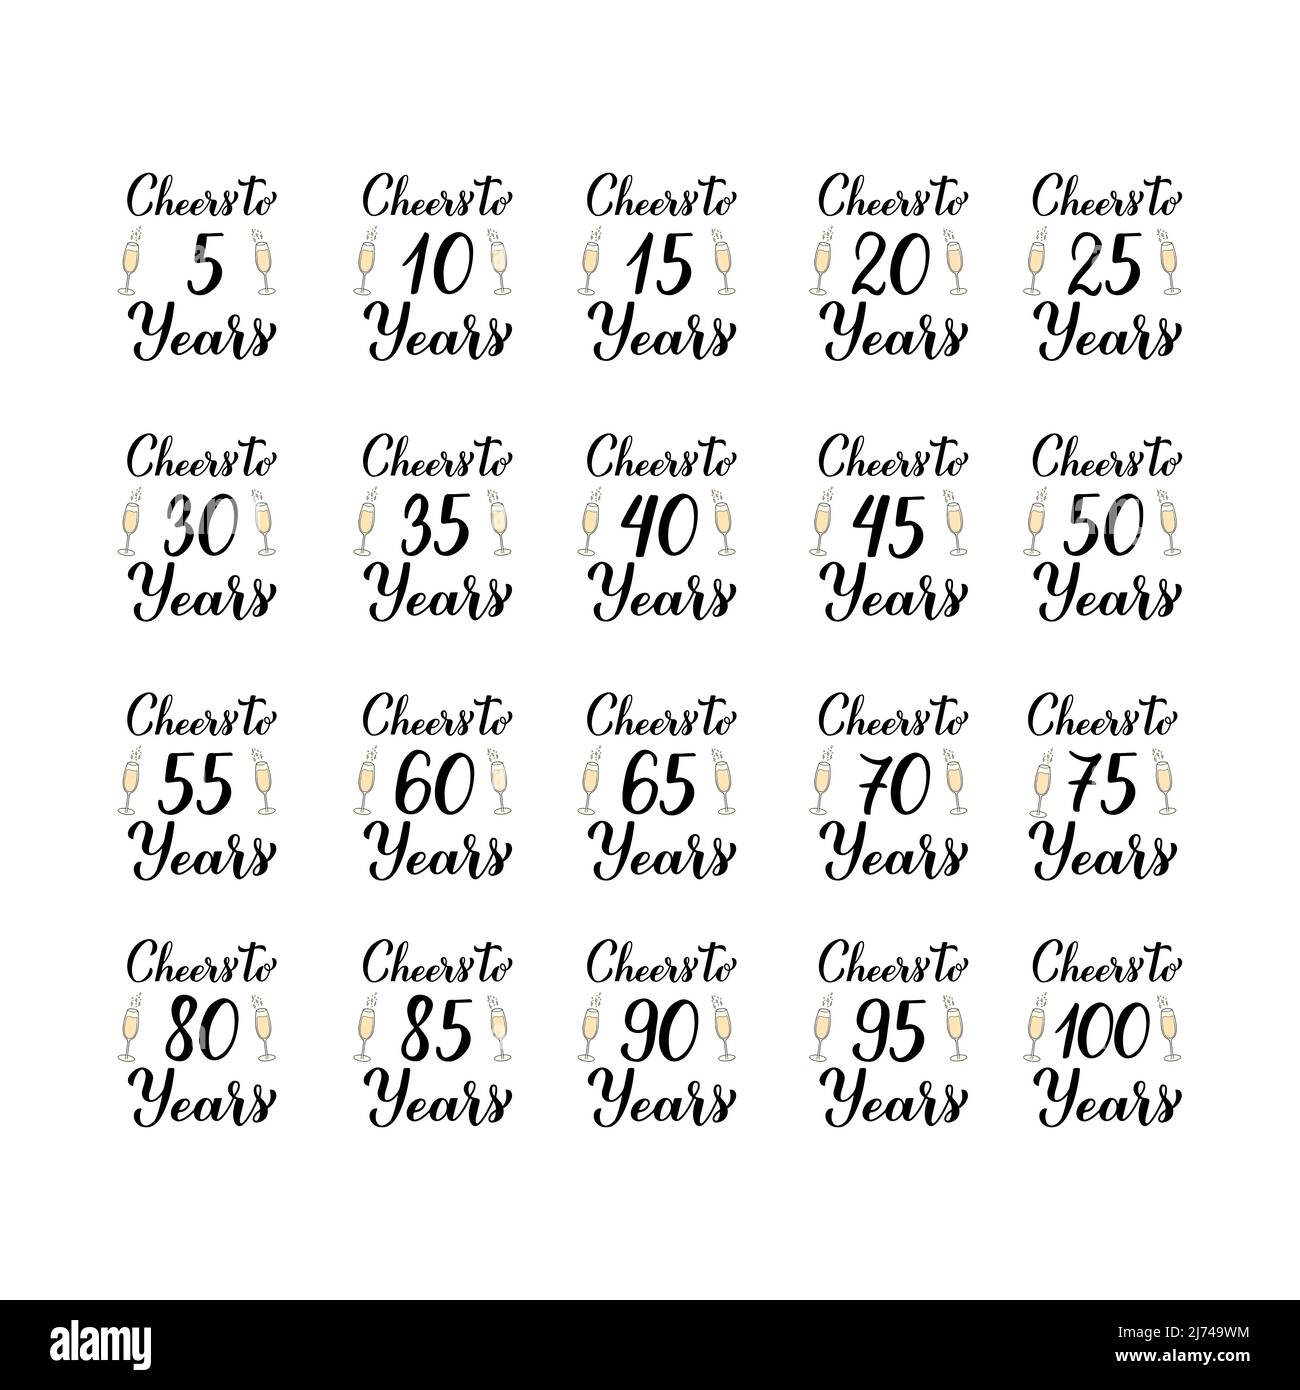 Cheers to years. Set of 5, 10, 20, 25, 30, 35, 40, 45, 50, 55, 60, 65, 70, 75, 80, 85, 90, 95 and 100 Birthday or Anniversary celebration calligraphy Stock Vector